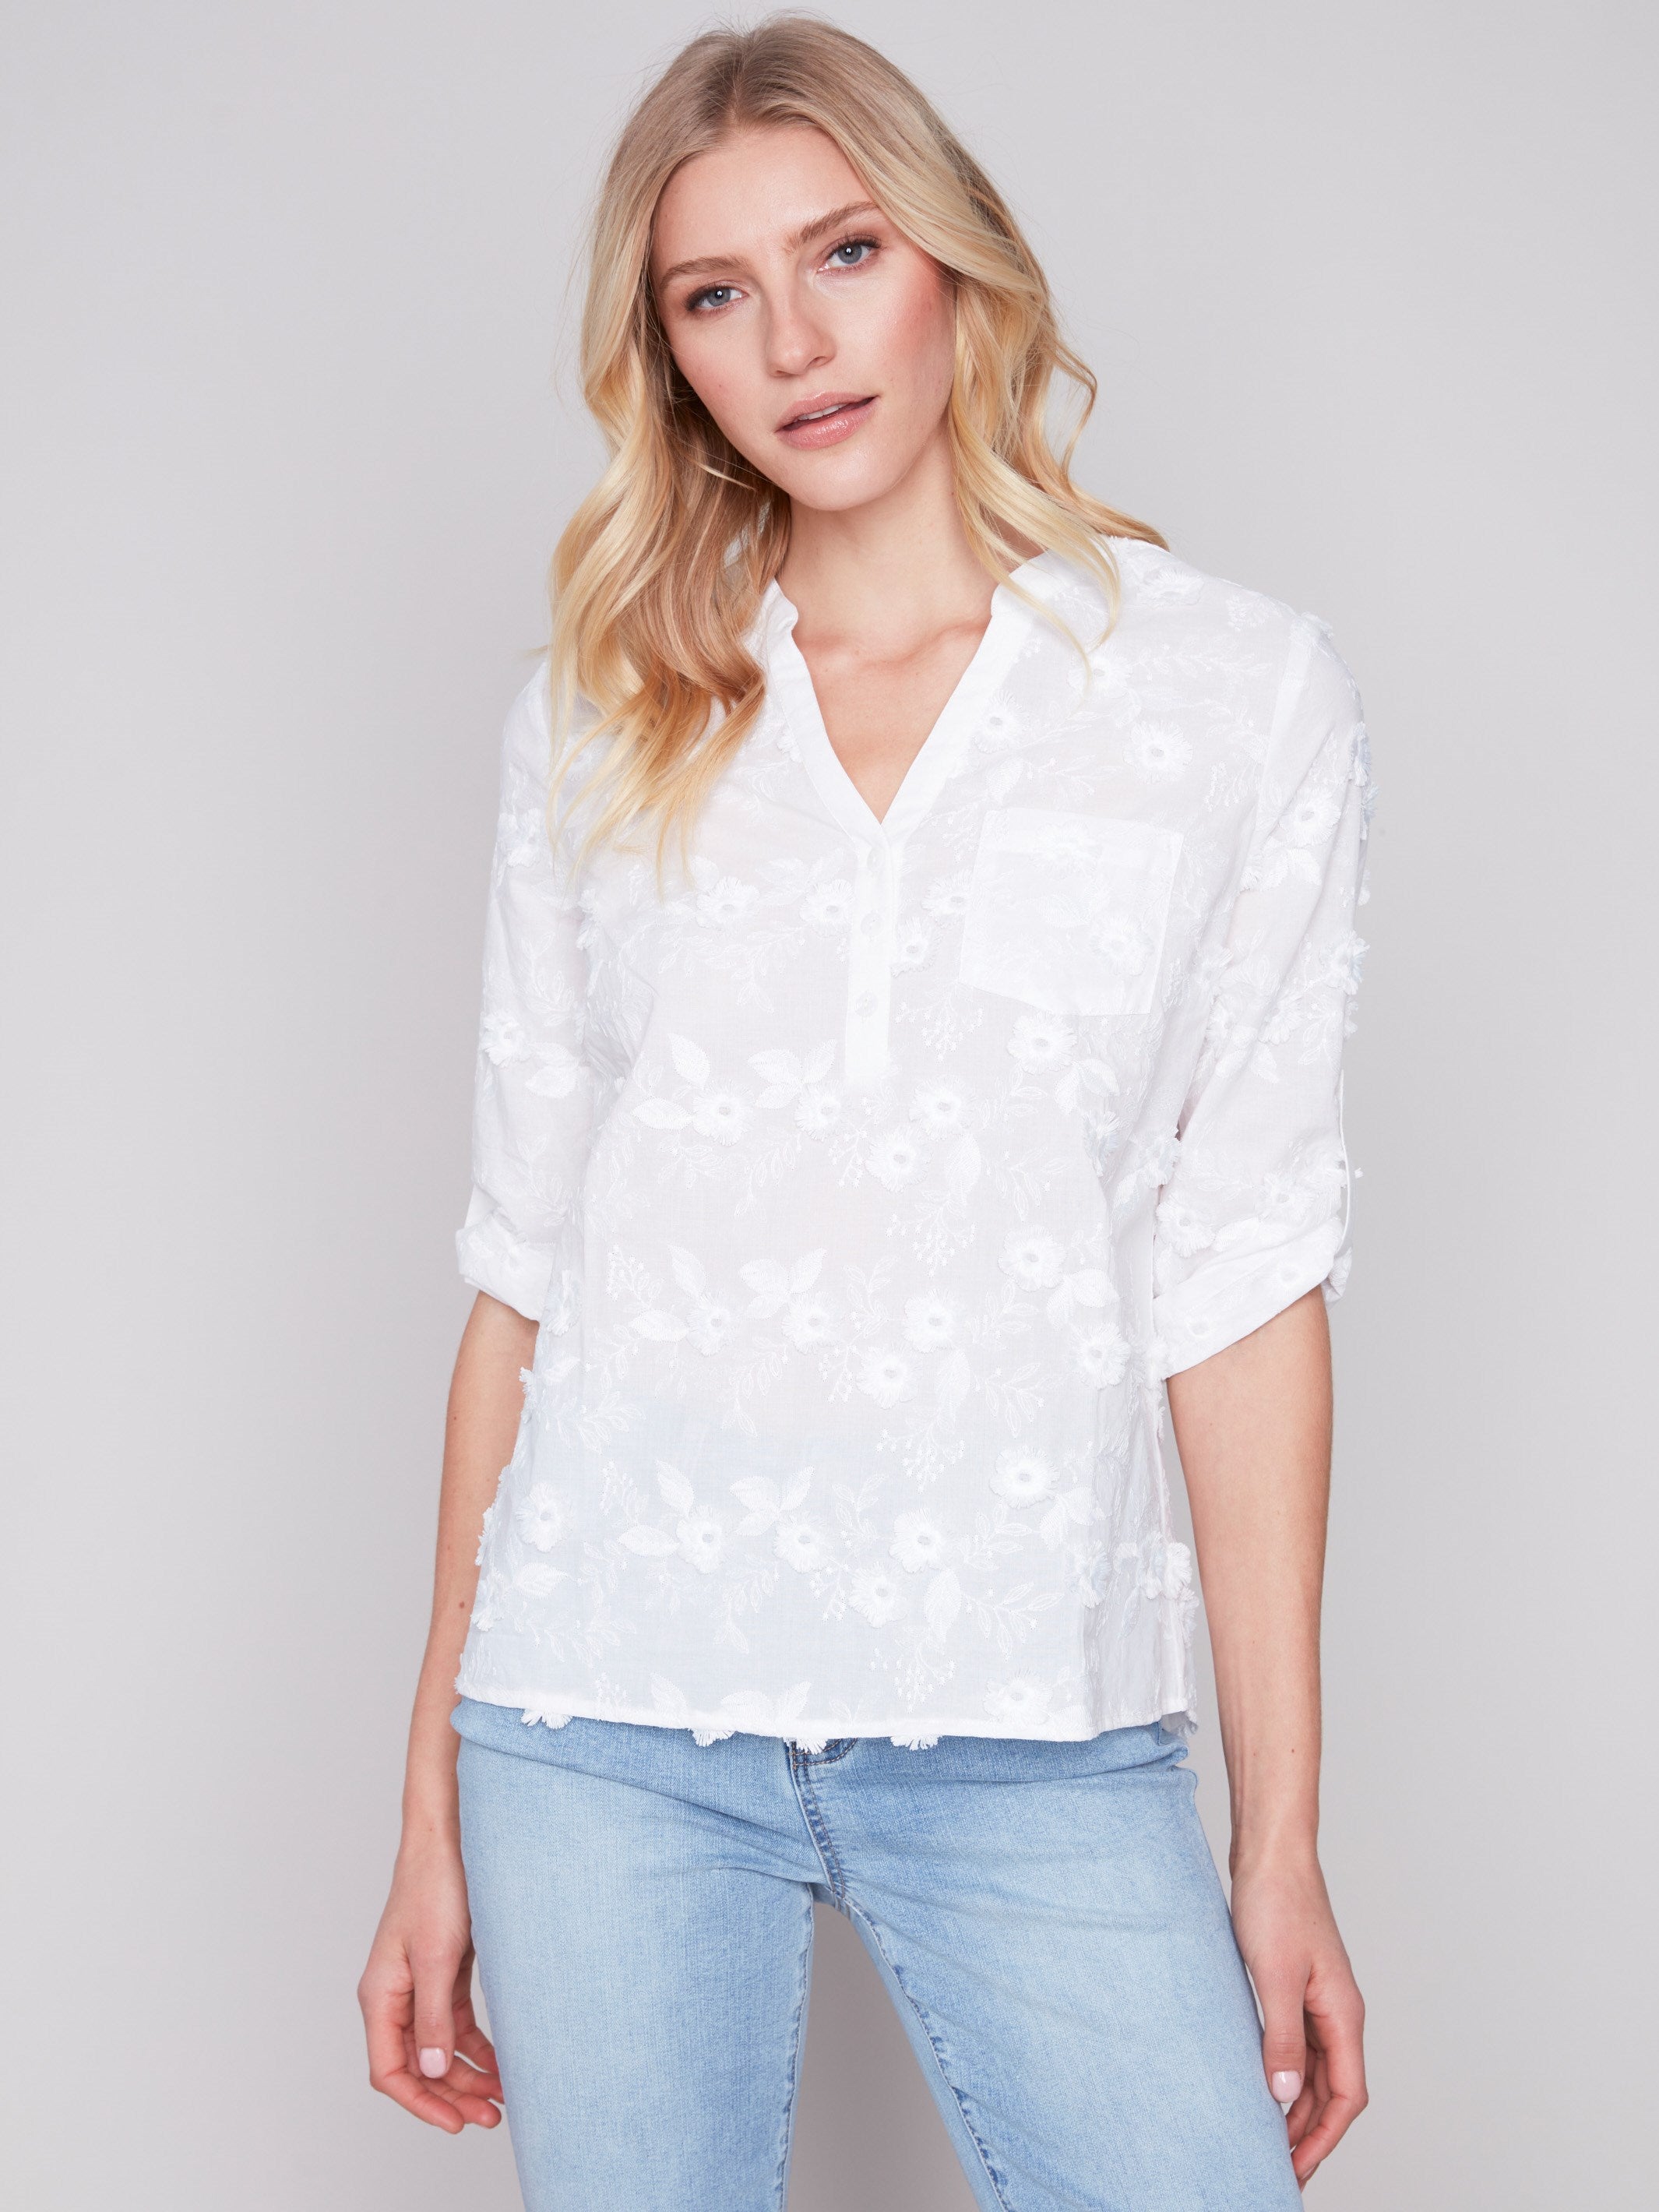 Charlie B Half-Button Embroidered Cotton Blouse - White - Image 4